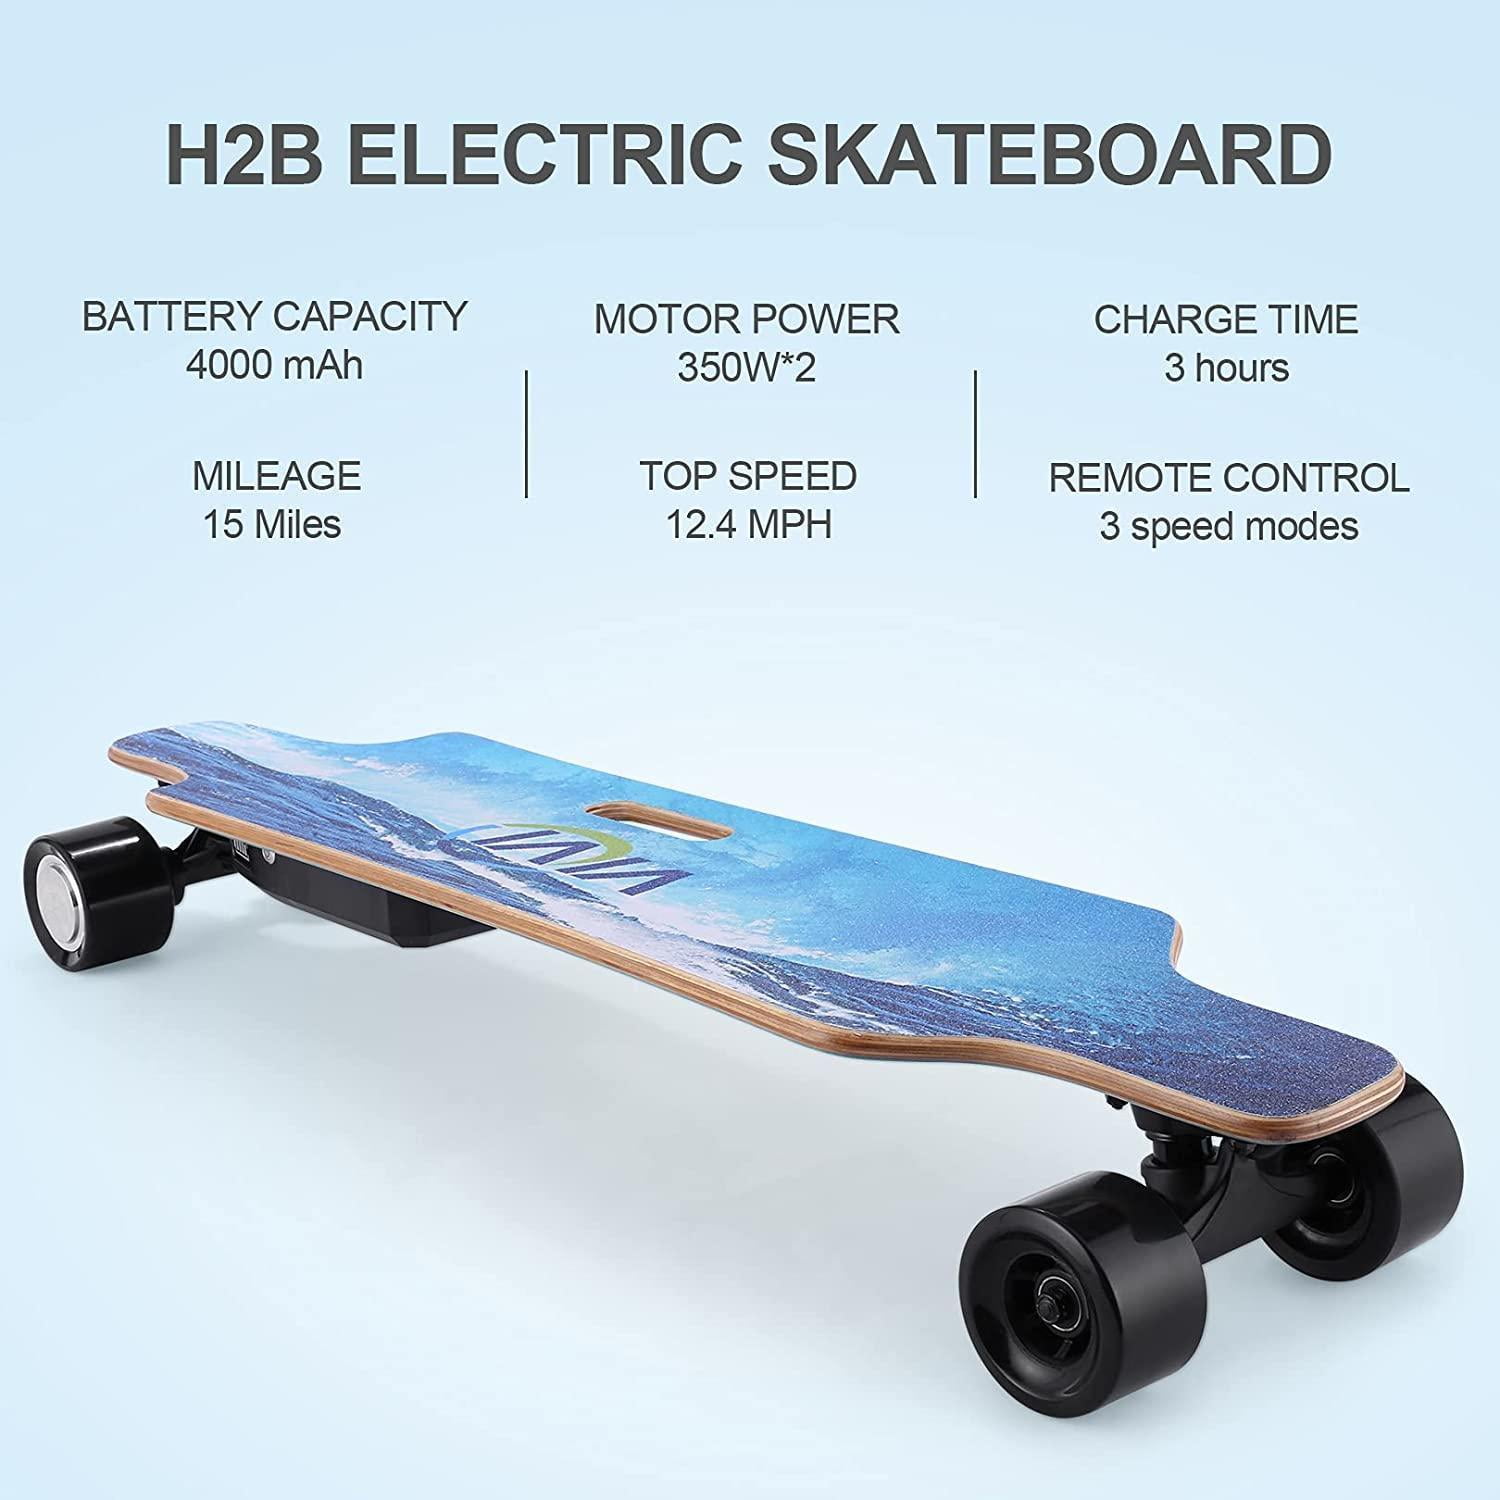 Details about  / Dual Motors 350W Power 36/" Electric Skateboard with Wireless Remote Control USA